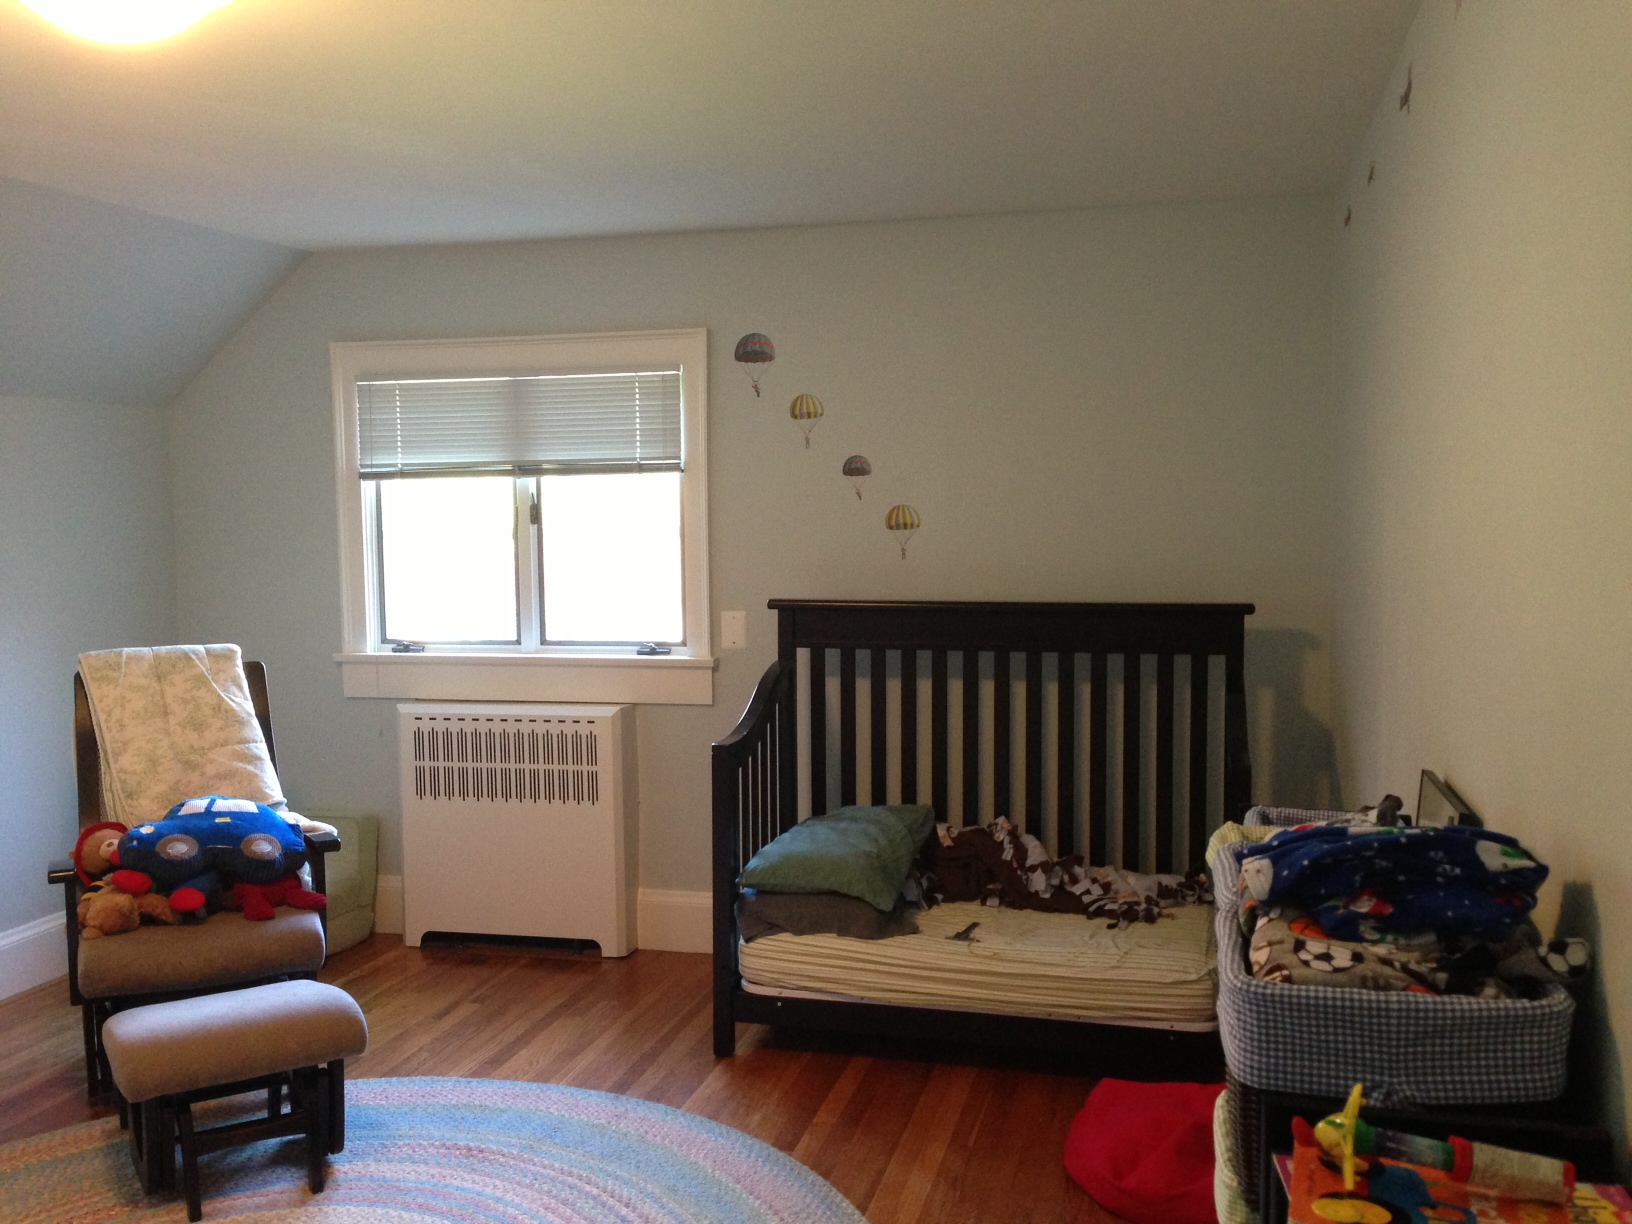 Lightened-Up Tudor: BEFORE | Kelly Rogers Interiors | Interiors For Families